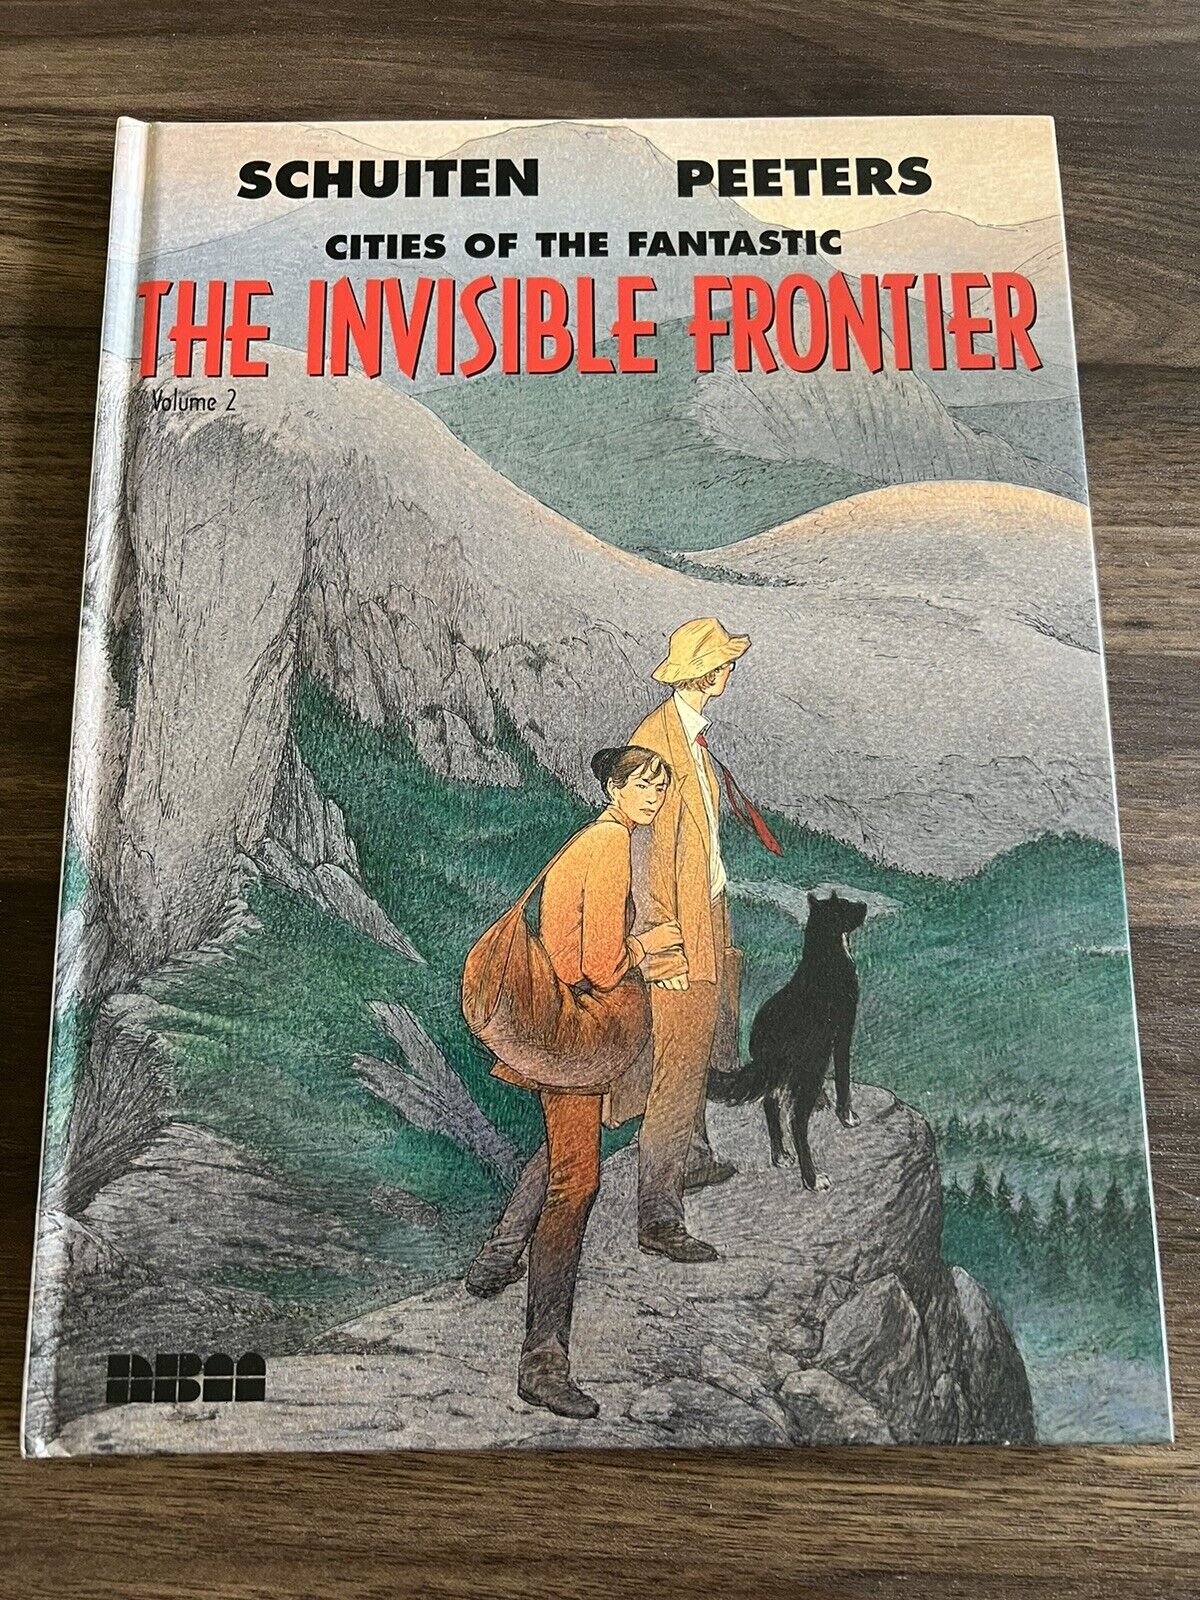 Cities of the Fantastic: The Invisable Frontier Volume 2